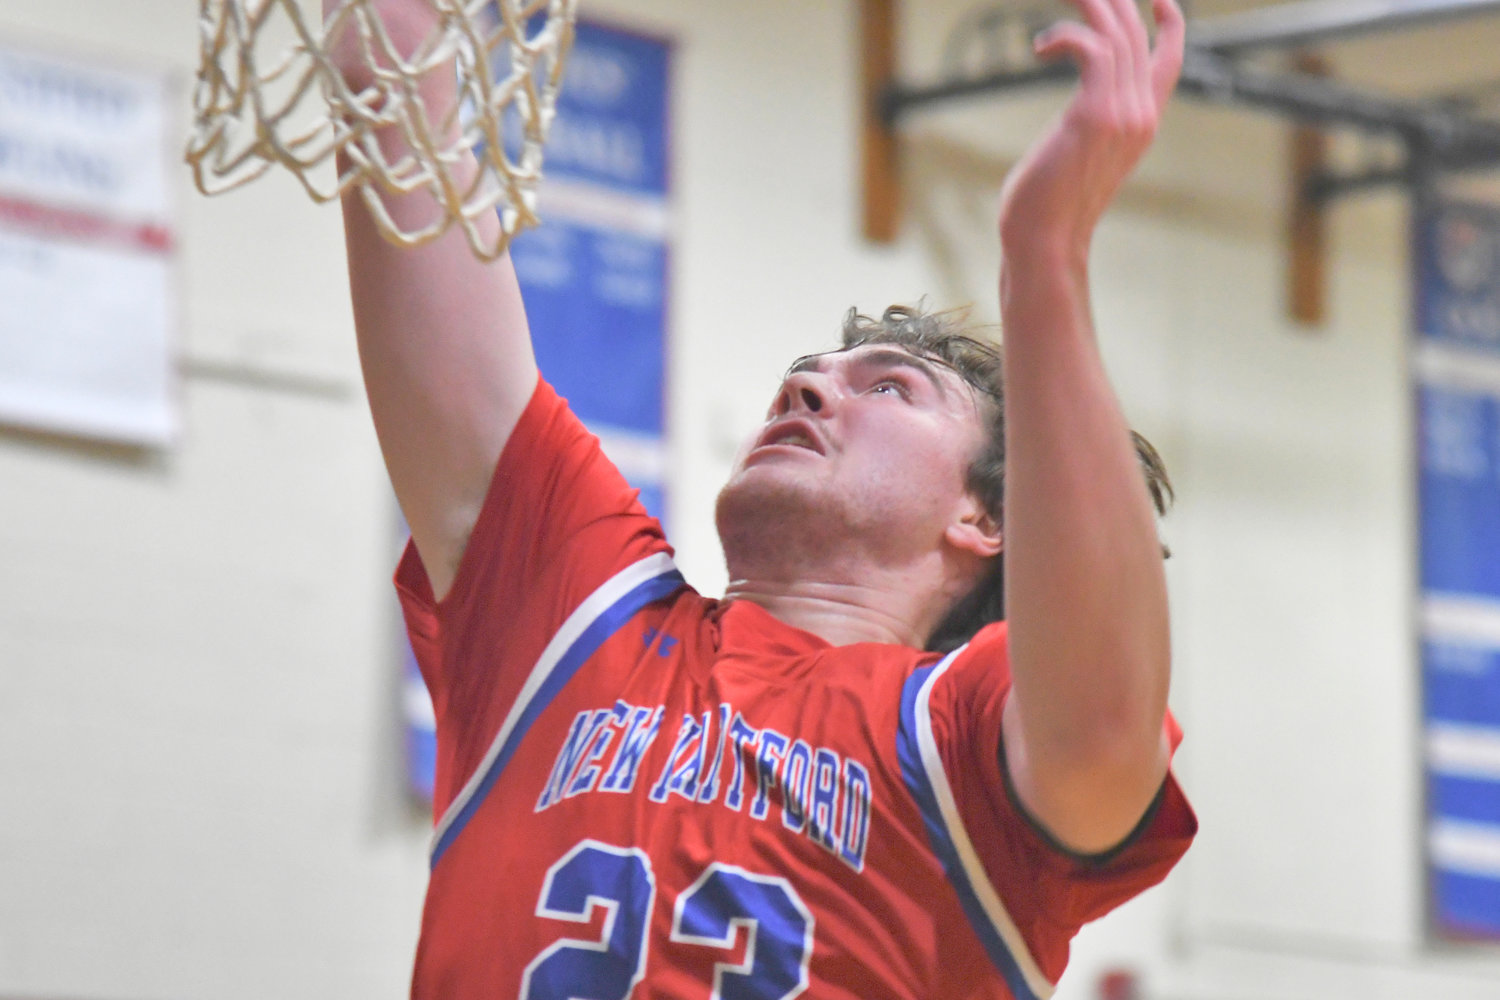 New Hartford's Zach Philipkoski goes up for a loose ball on Tuesday in a game against Thomas R. Proctor. Philipkoski became the school's all-time leader in points in the game.